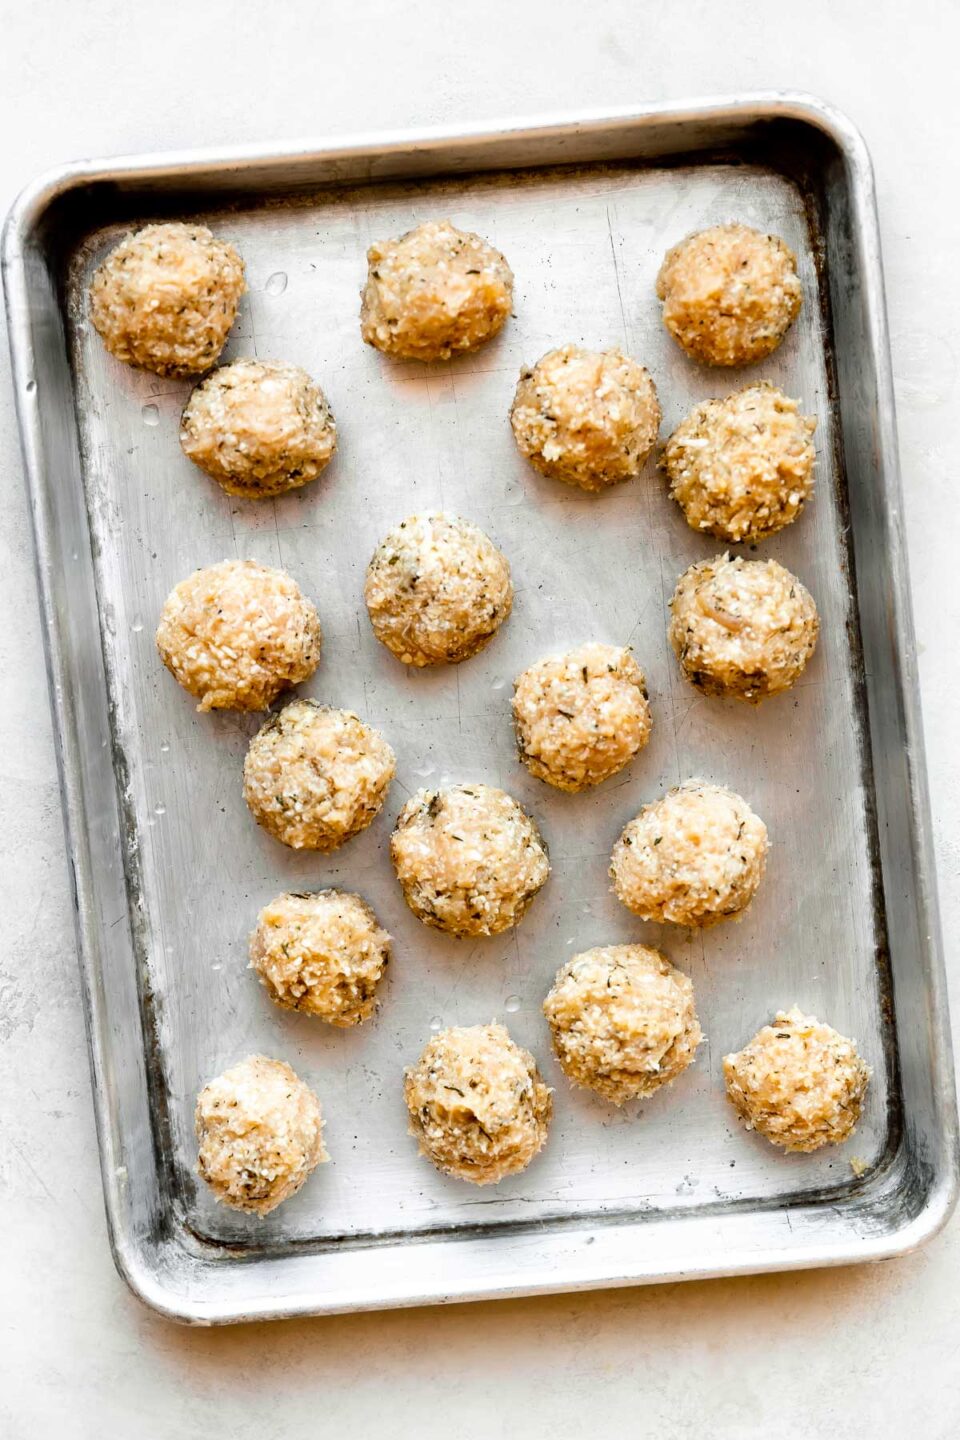 Eighteen formed chicken or turkey meatballs are arranged atop a metal baking sheet. The baking sheet sits atop a creamy white textured surface.